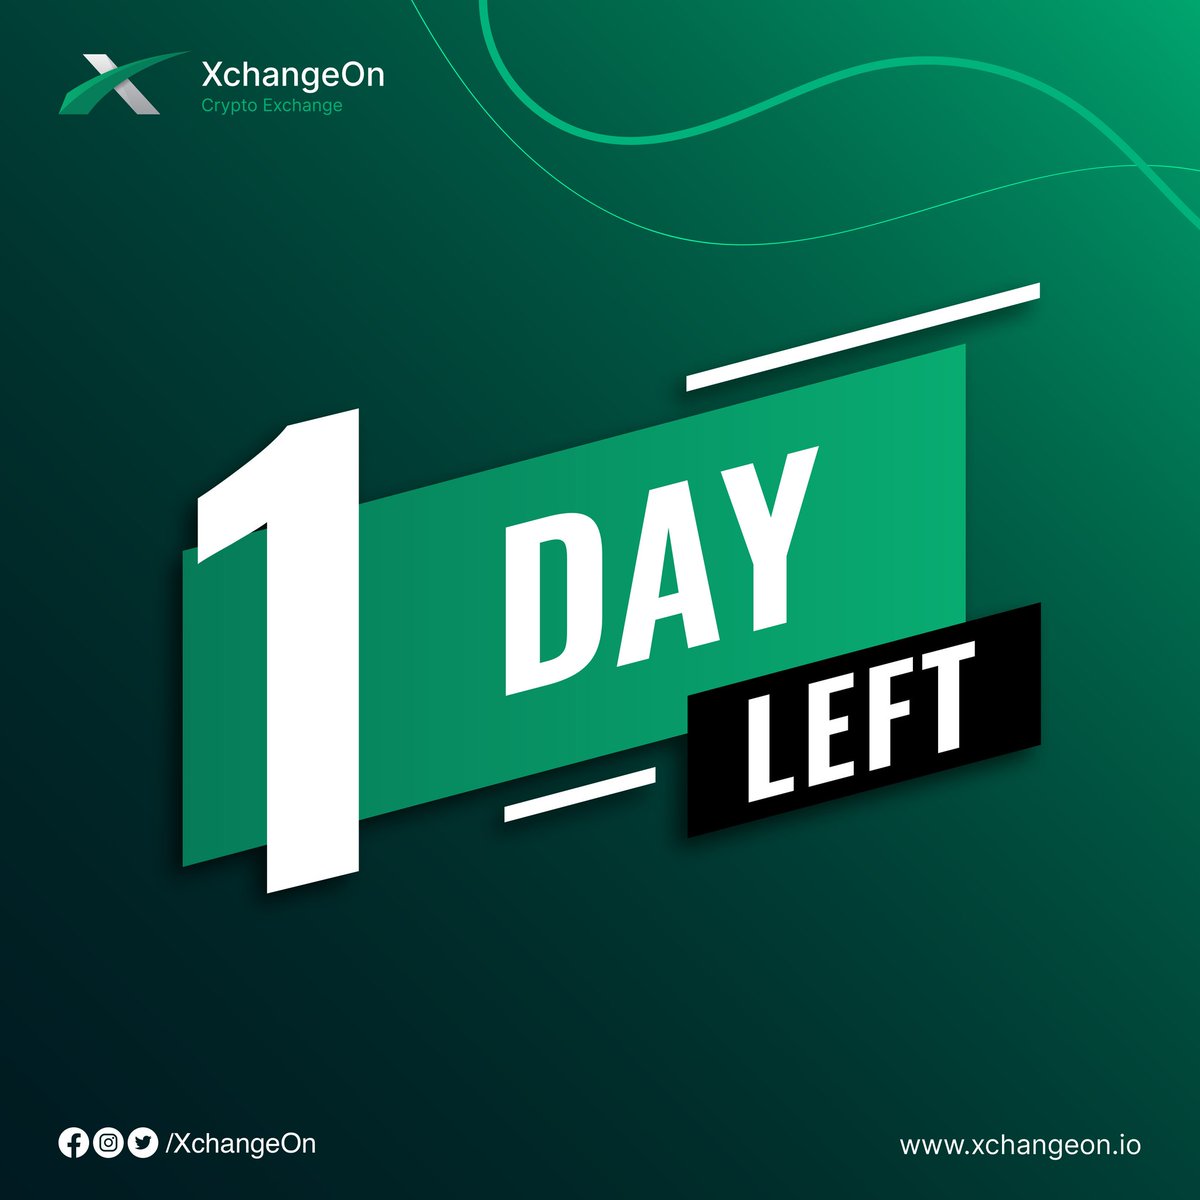 The final countdown is here! ⏰ Just 1 day left until April 15th, the day we've all been waiting for in the world of #crypto. Get ready to witness history in the making! 🎉

Don't forget to stay tuned for the big reveal from #BFIC at #InnovationFactory! 🔥
.
.
.
#Xchangeon 🚀